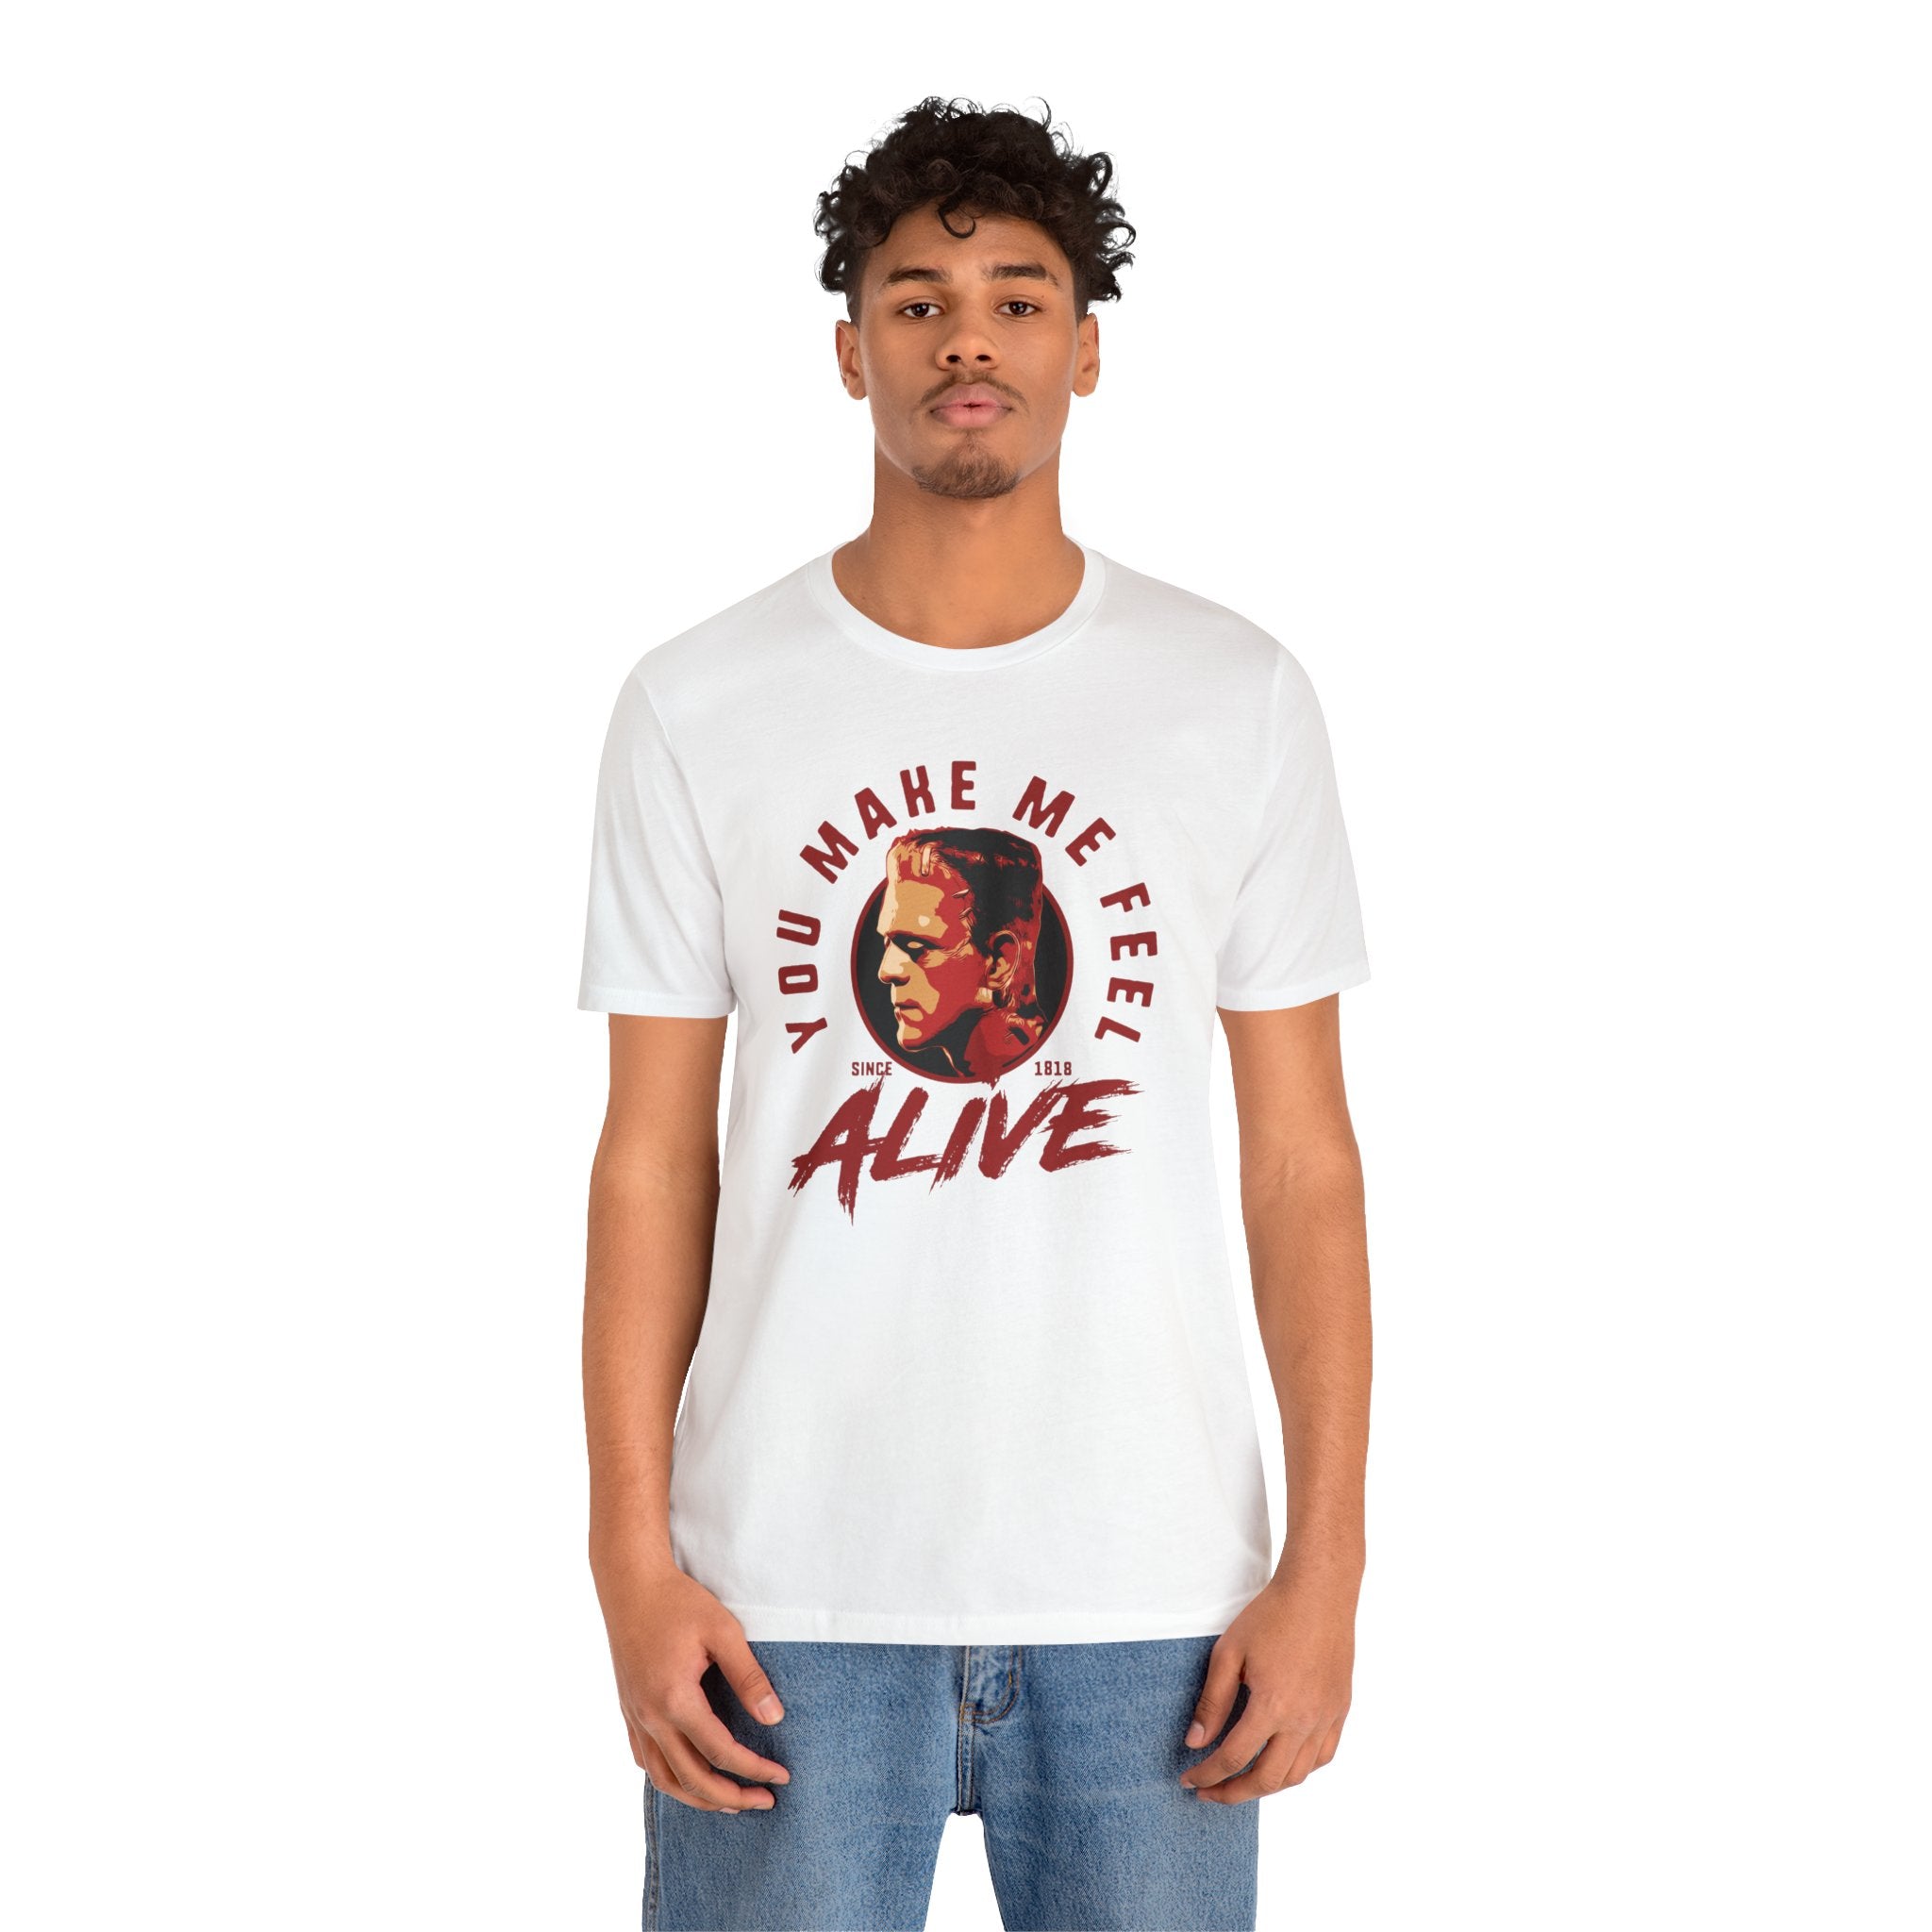 A young man wearing a white unisex You Make Me Feel Alive tee with a quality print and blue jeans stands against a white background.